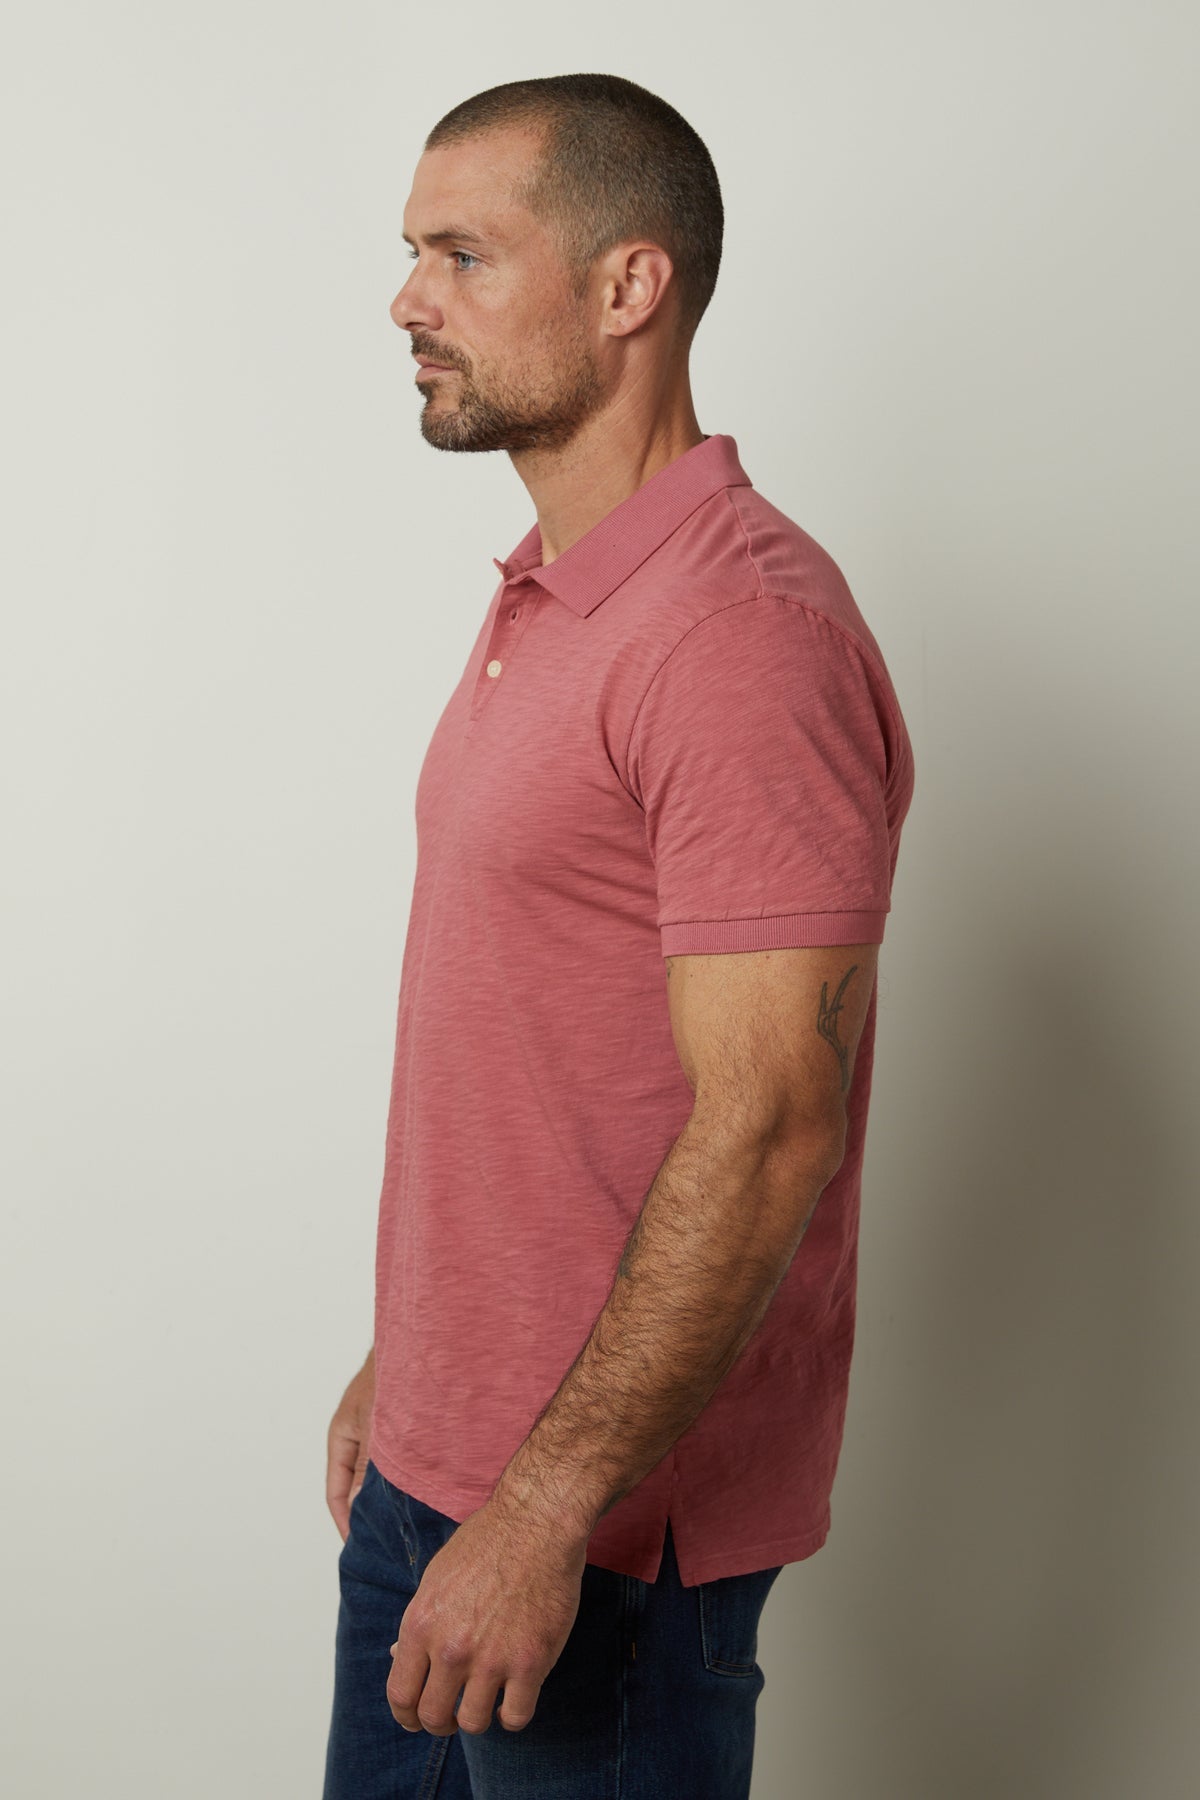 A man wearing a NIKO POLO shirt from Velvet by Graham & Spencer and jeans.-35783017627841